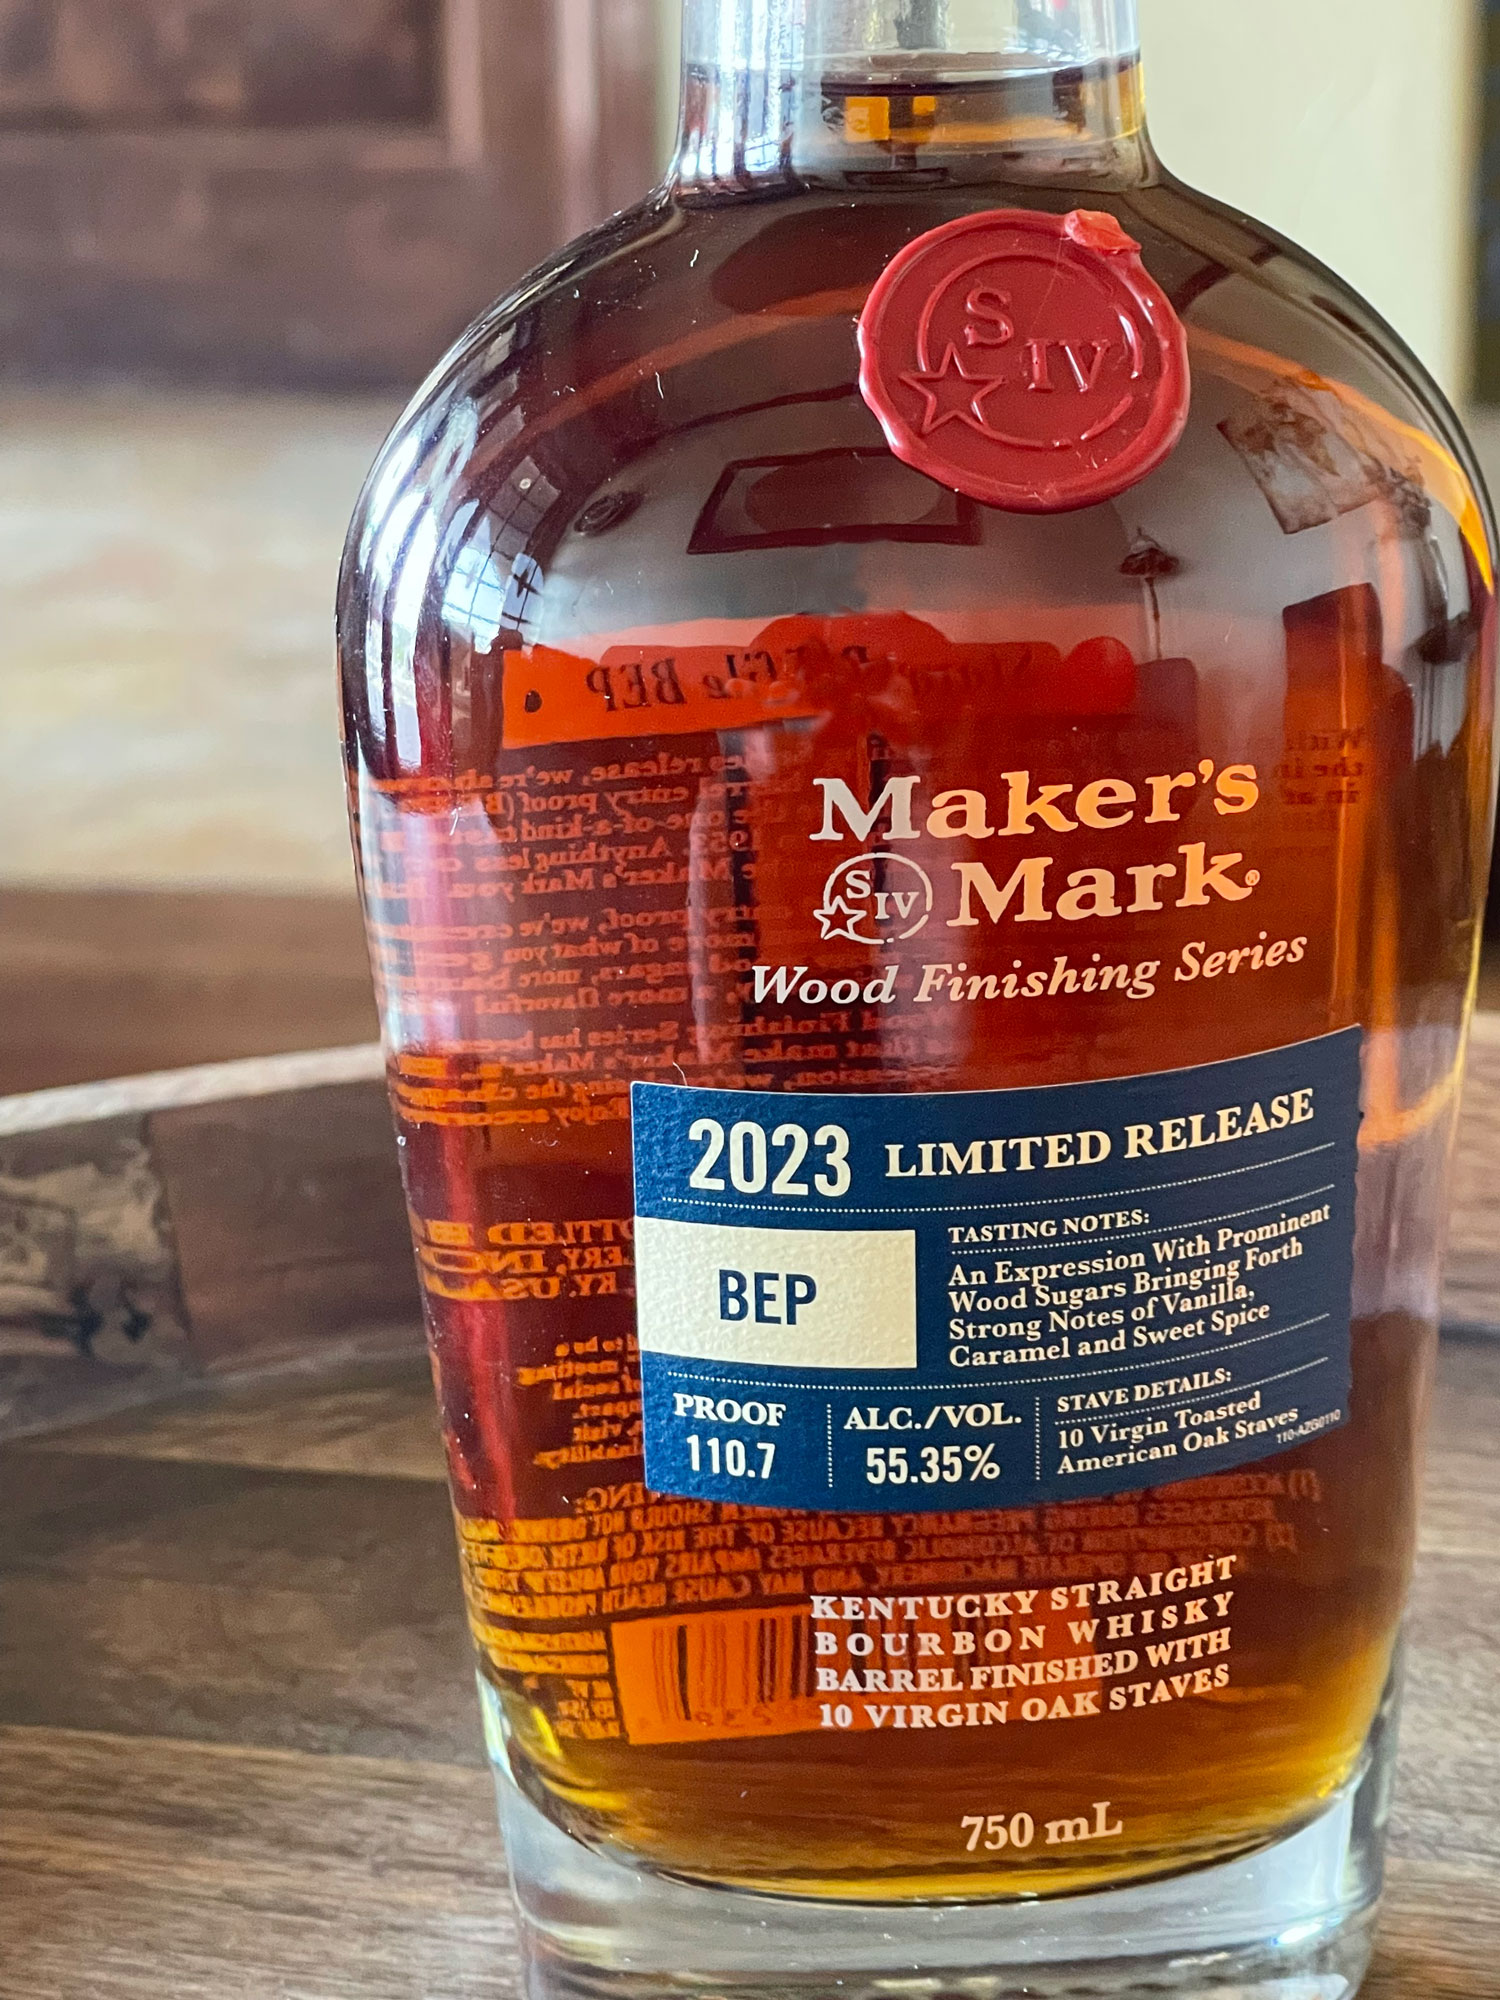 Maker's Mark Wood Finishing Series Limited Release BEP for 2023